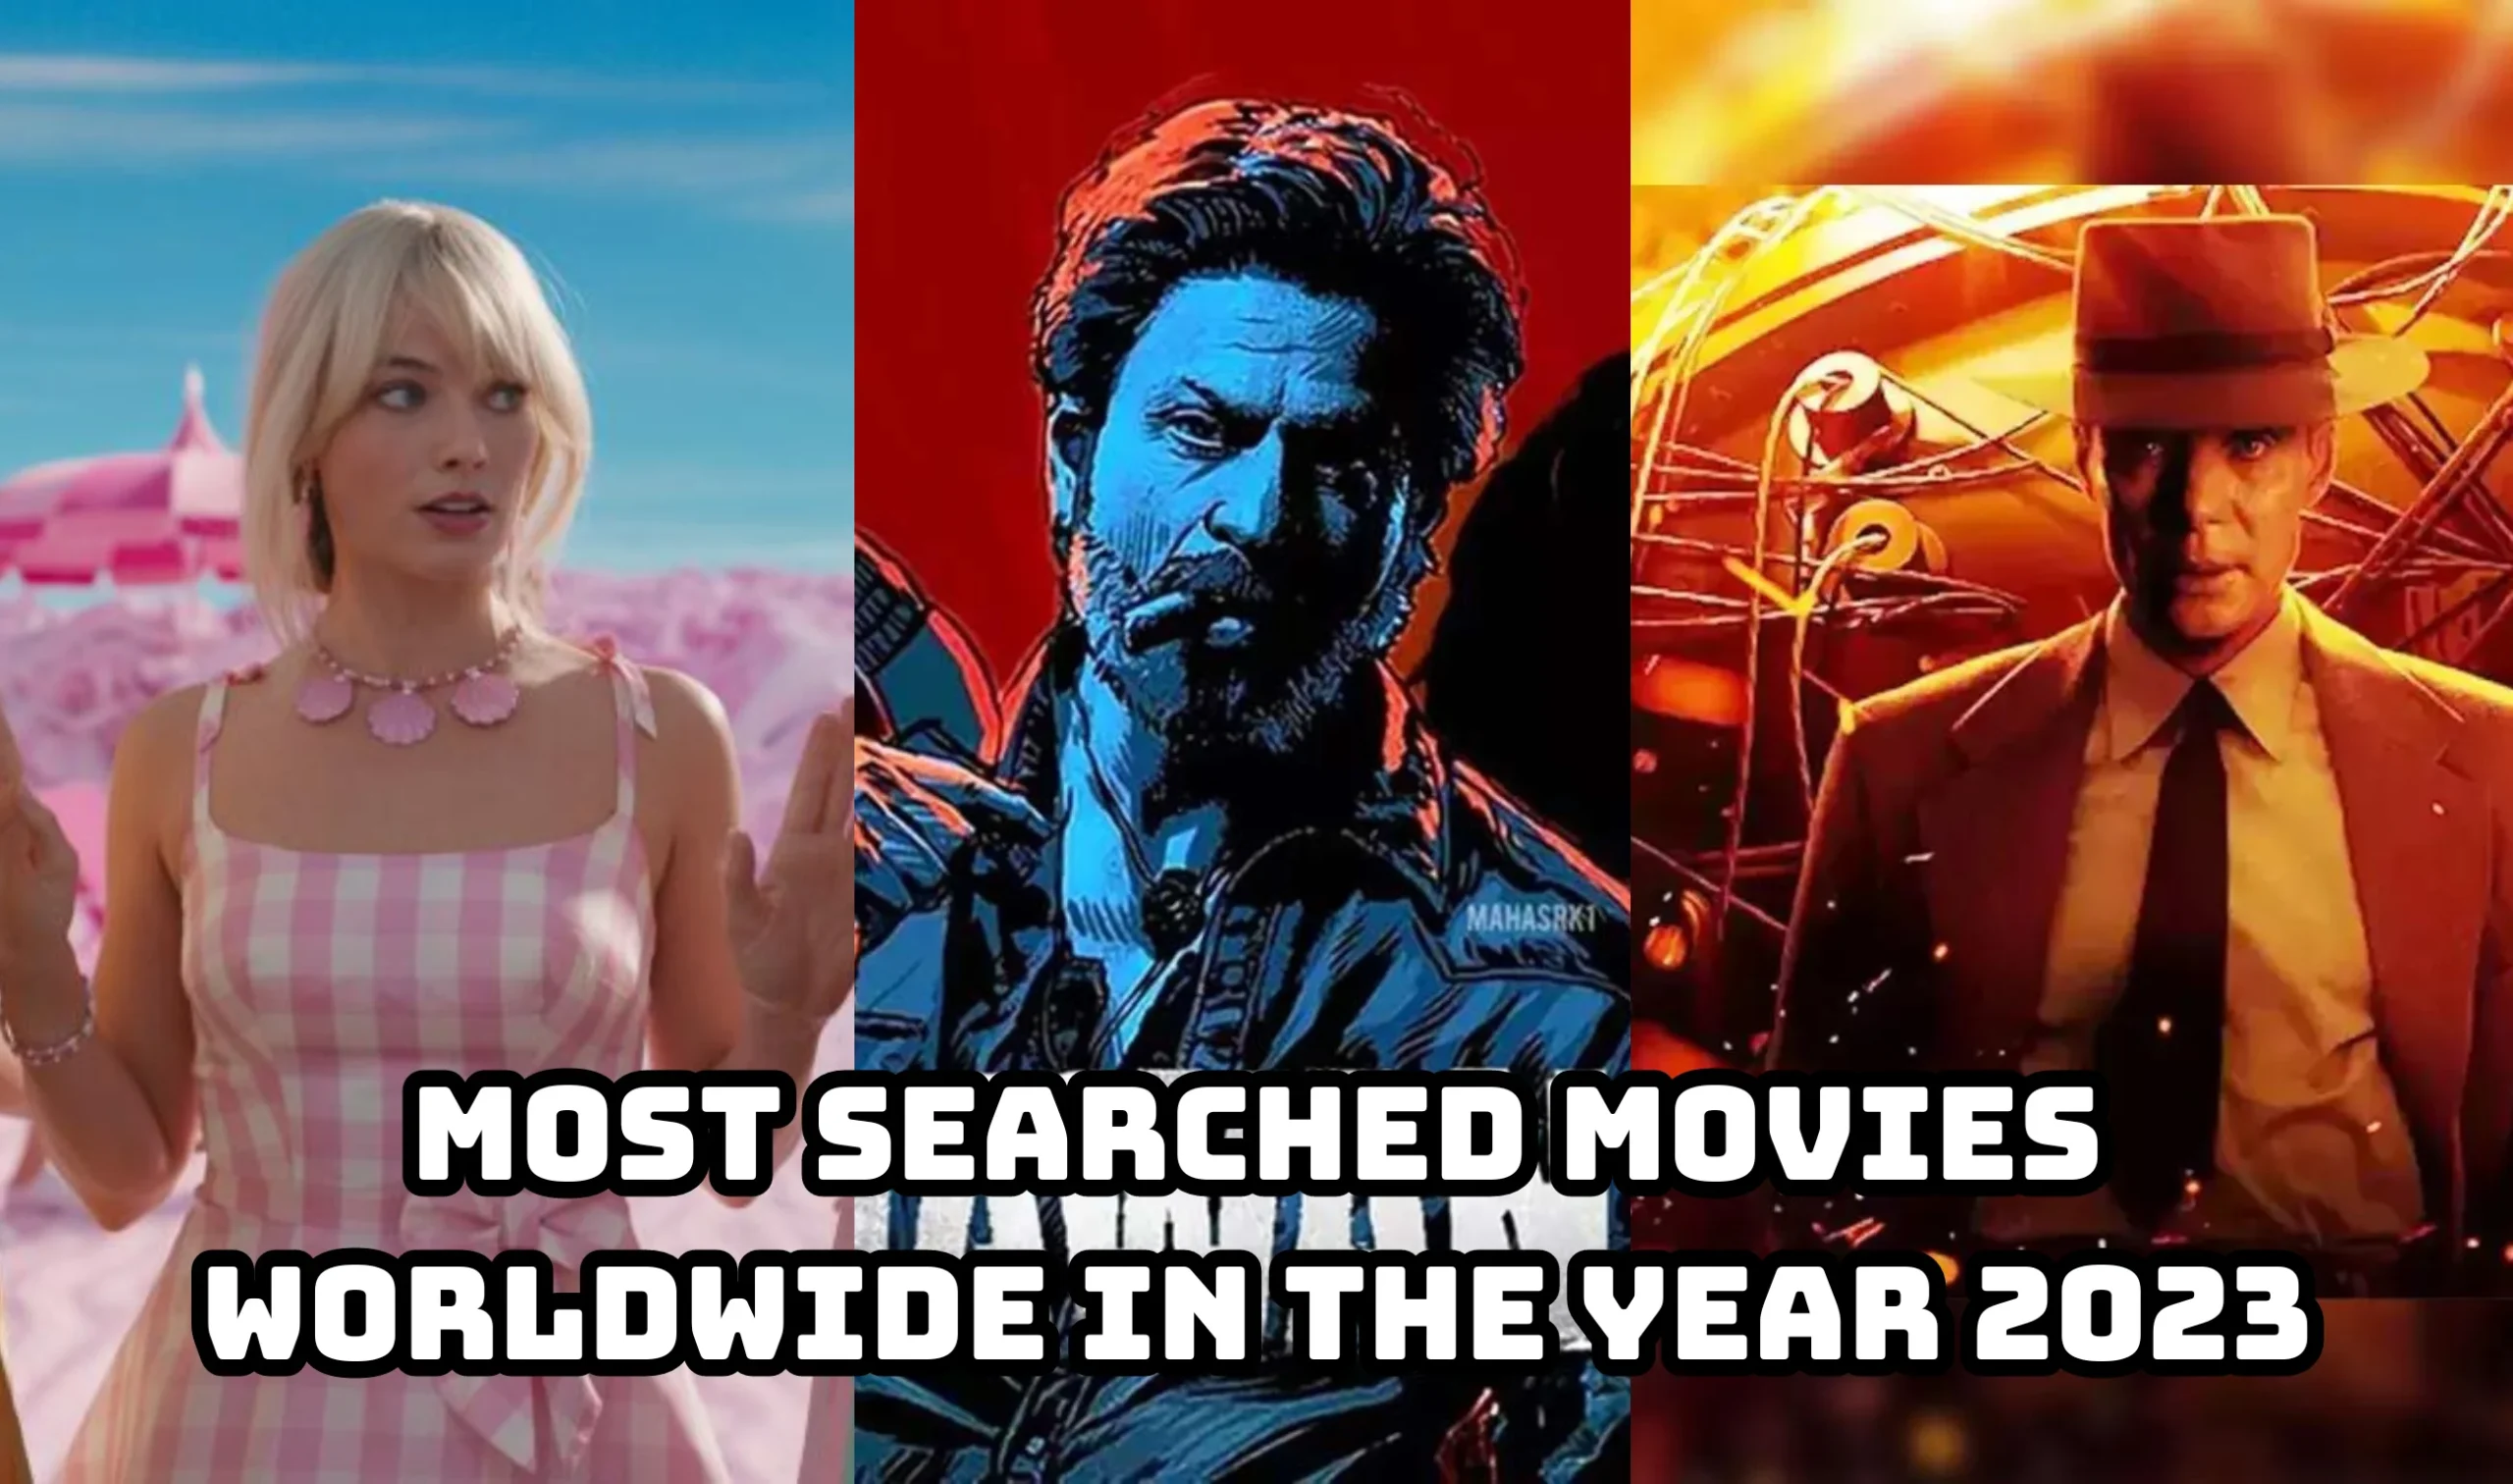 Top 3 Most Searched Movies Worldwide in the Year 2023